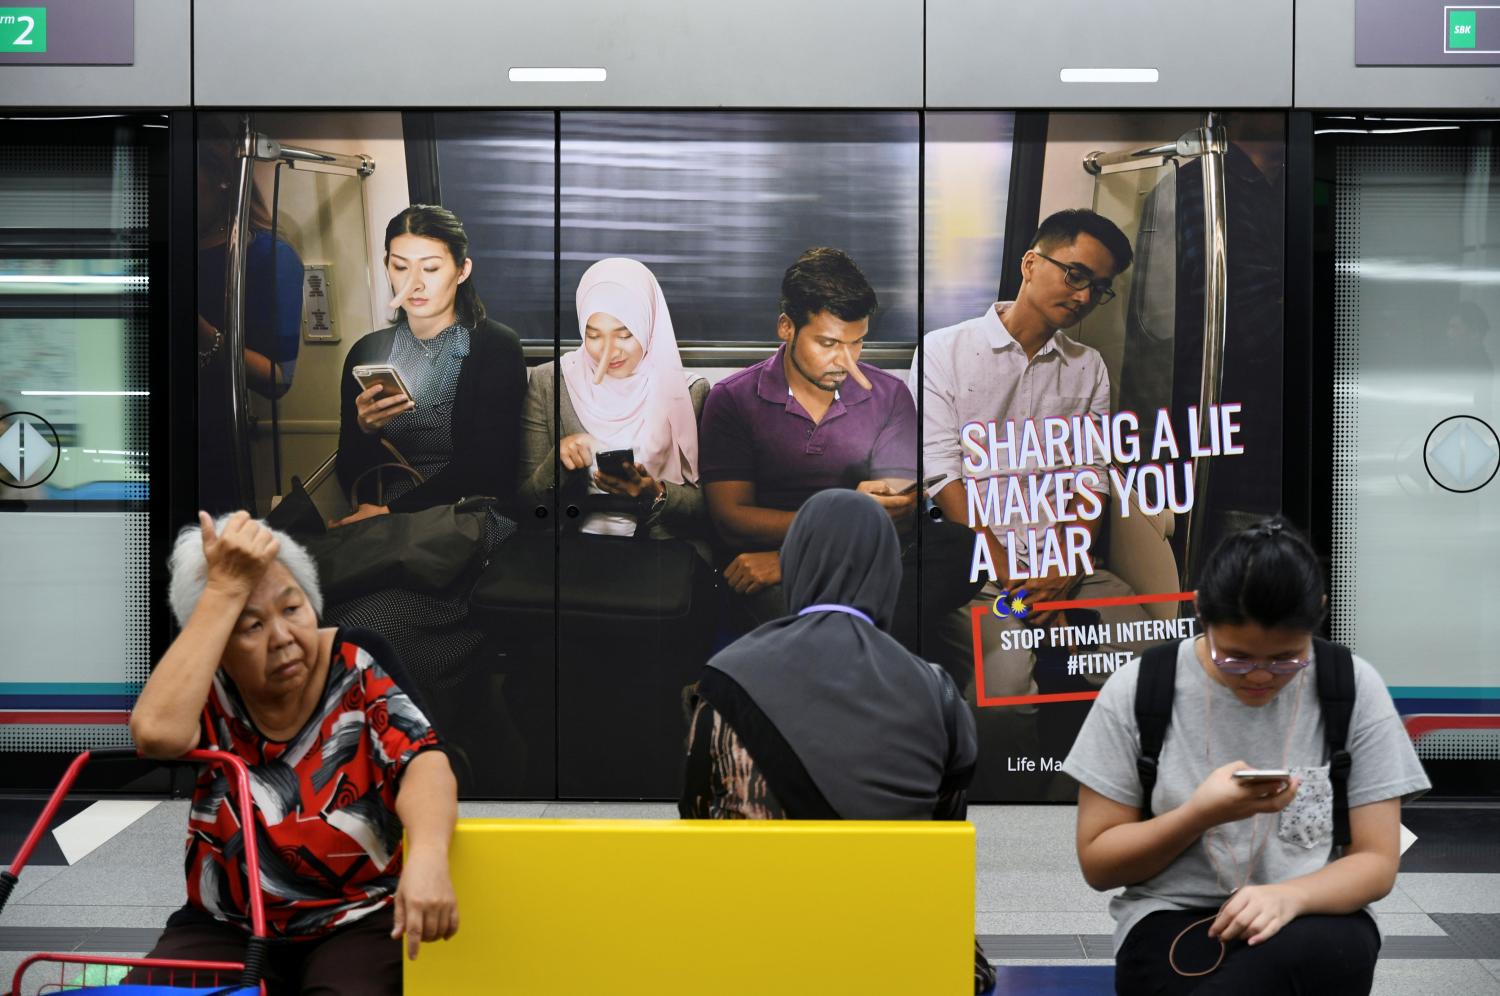 Commuters sit in front of an advertisement discouraging the dissemination of fake news, at a train station in Kuala Lumpur, Malaysia March 28, 2018. Picture taken March 28, 2018. REUTERS/Stringer